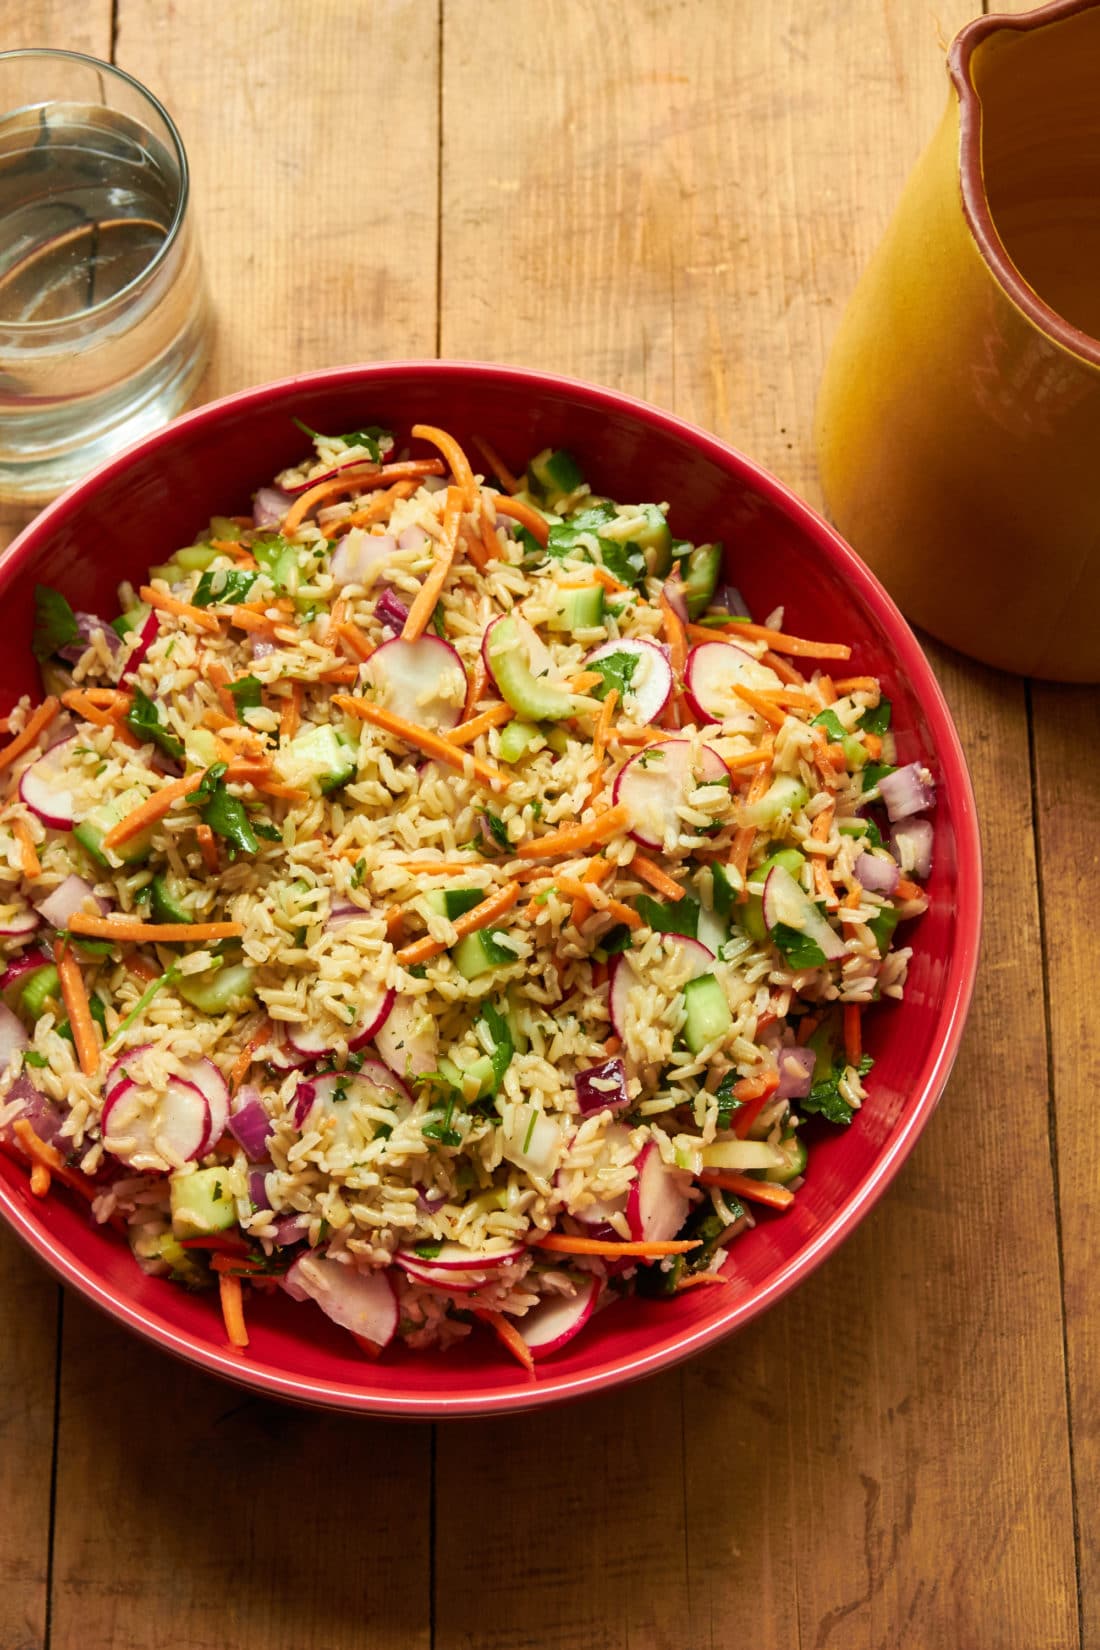 Vegetable and Brown Rice Salad in red bowl on wood table.